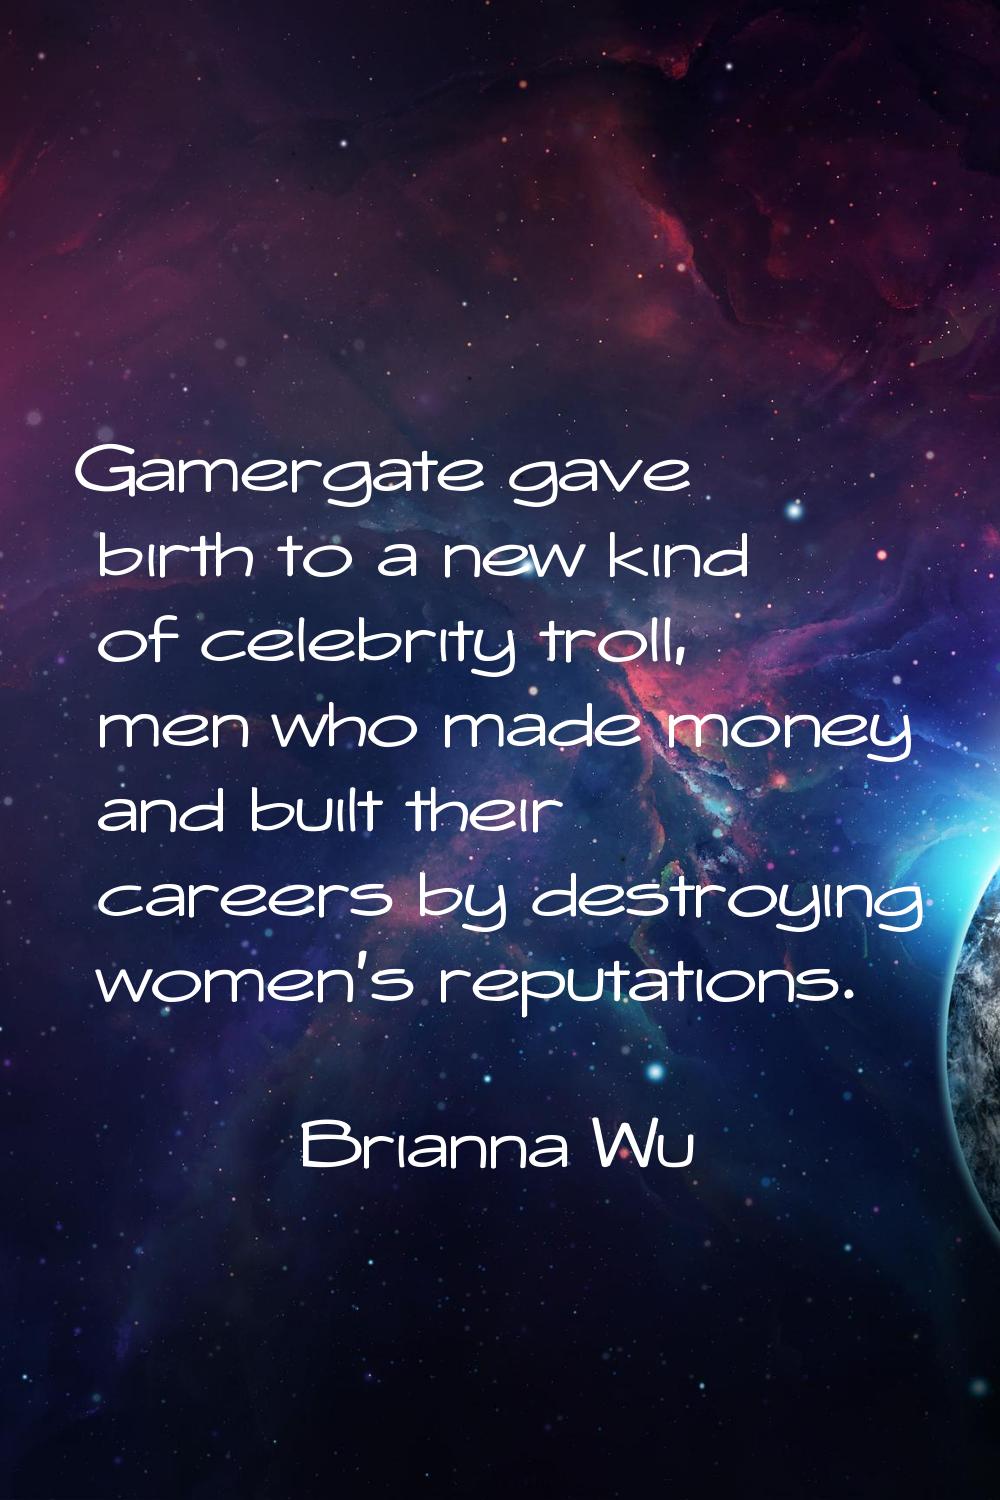 Gamergate gave birth to a new kind of celebrity troll, men who made money and built their careers b